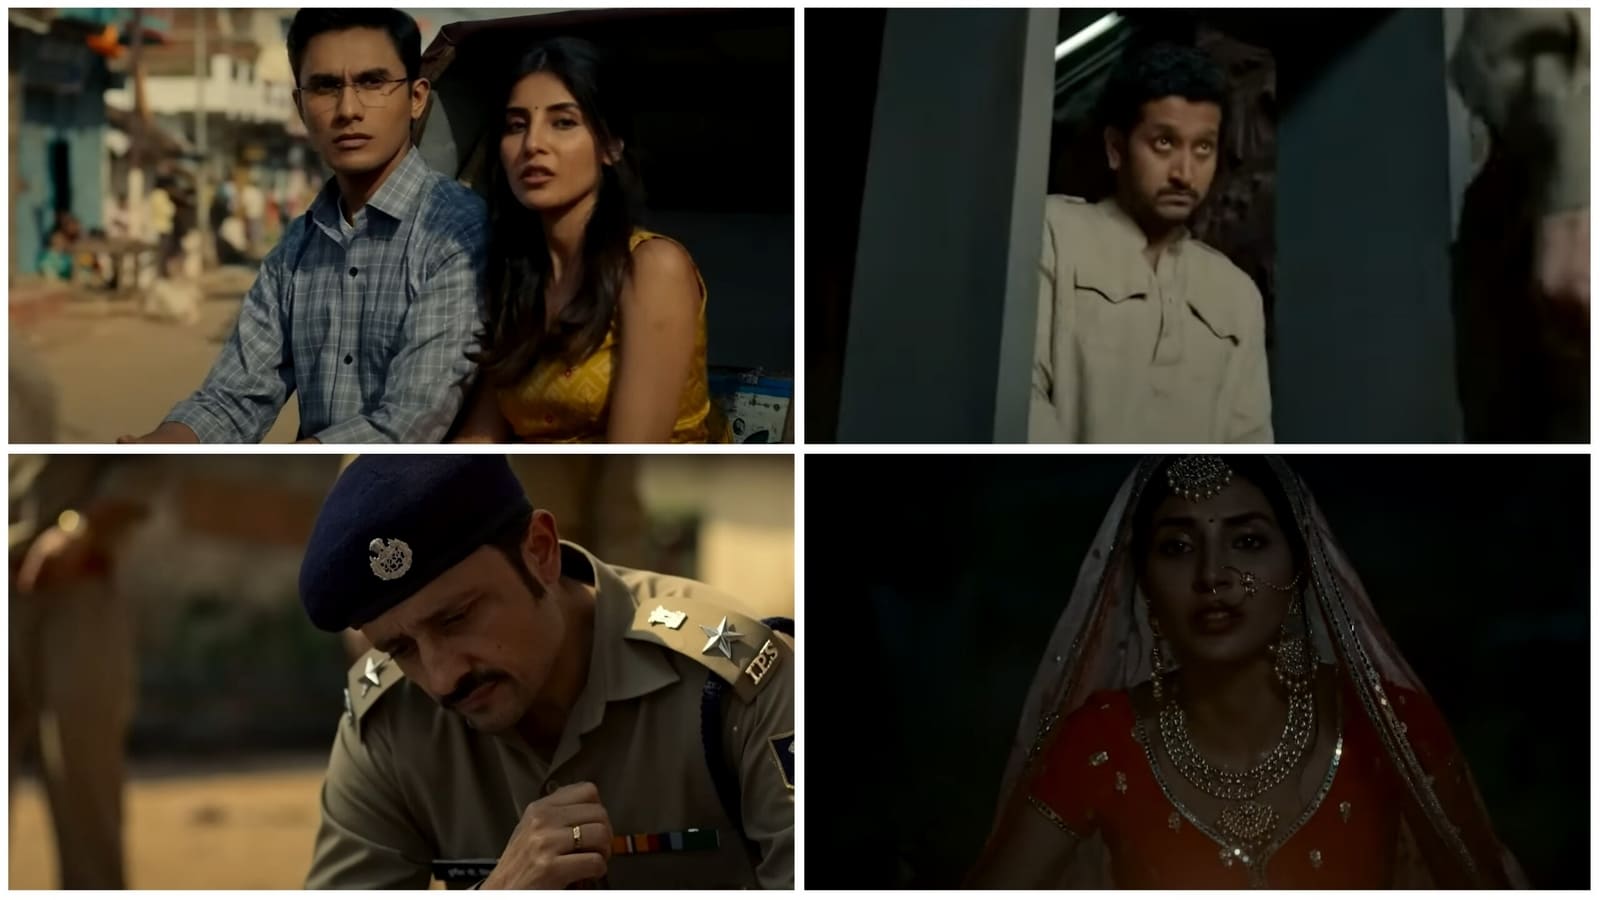 Jehanabad – Of Love & War trailer: Sudhir Mishra brings an intense tale of love, war and revolution